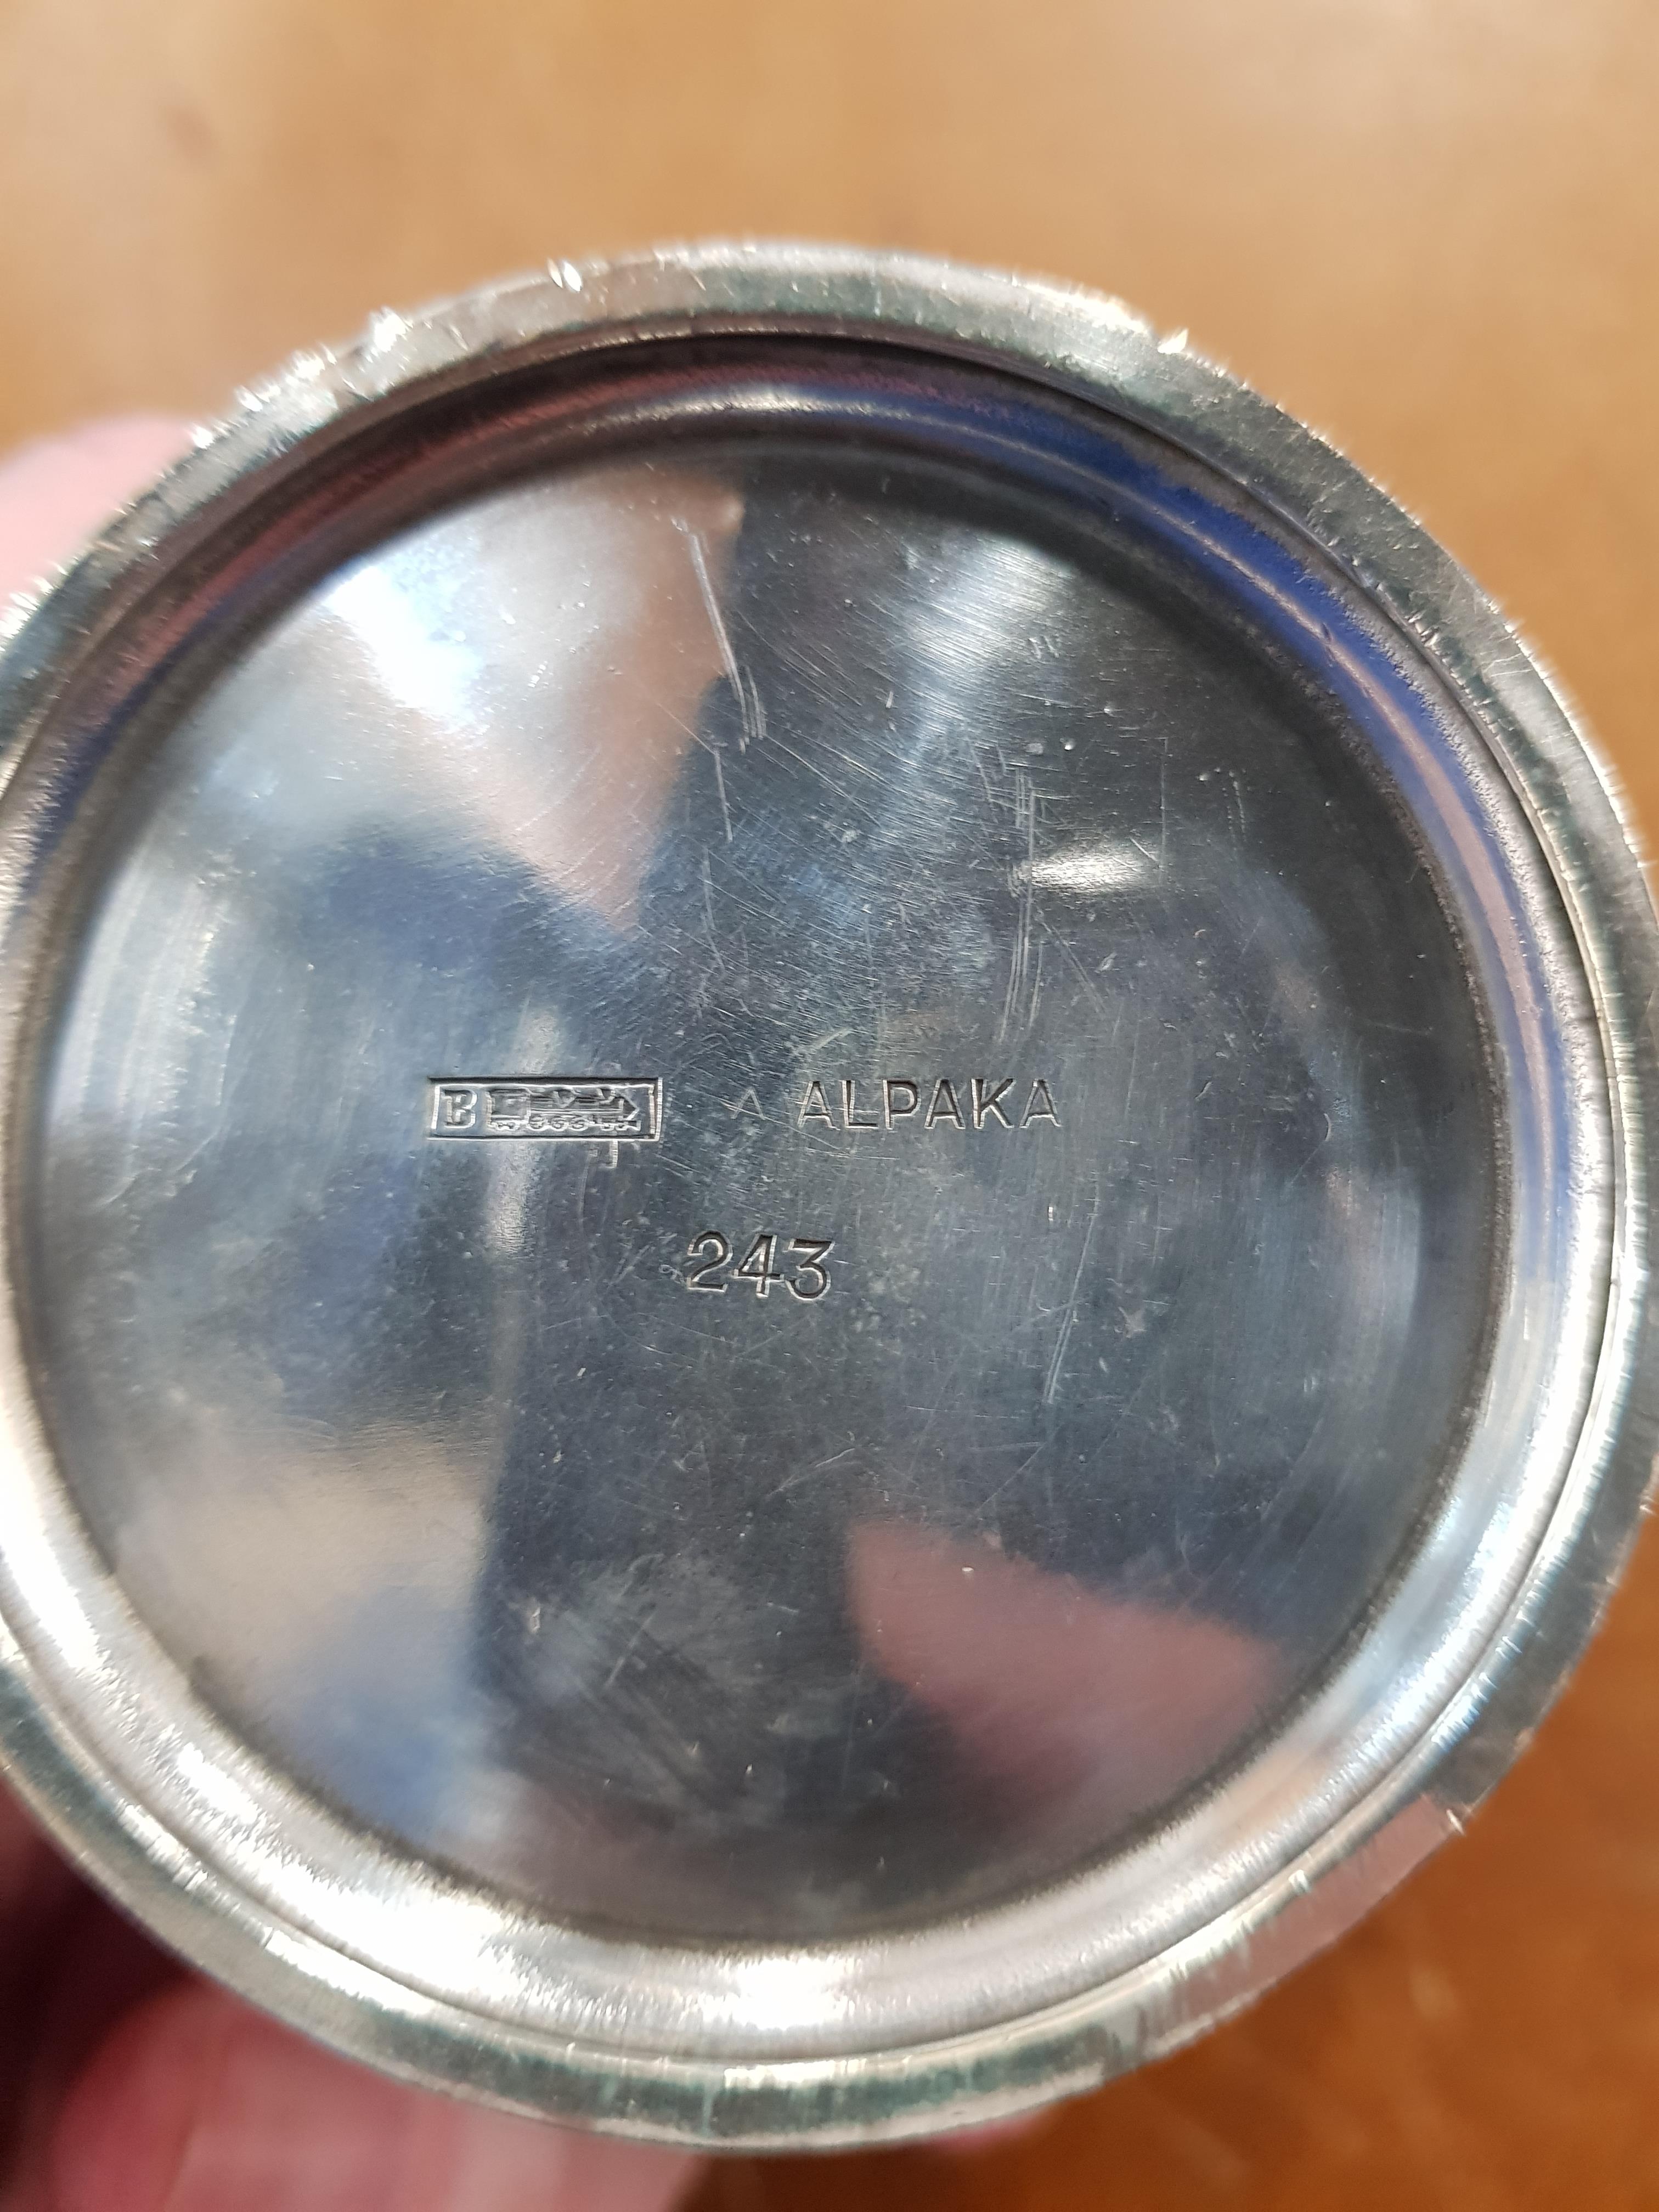 THIRD REICH, SILVER DEMITASSE CUP FROM HERMANN GORINGS DINING WAGON 10 '243' ON HIS TRAIN - Image 2 of 2